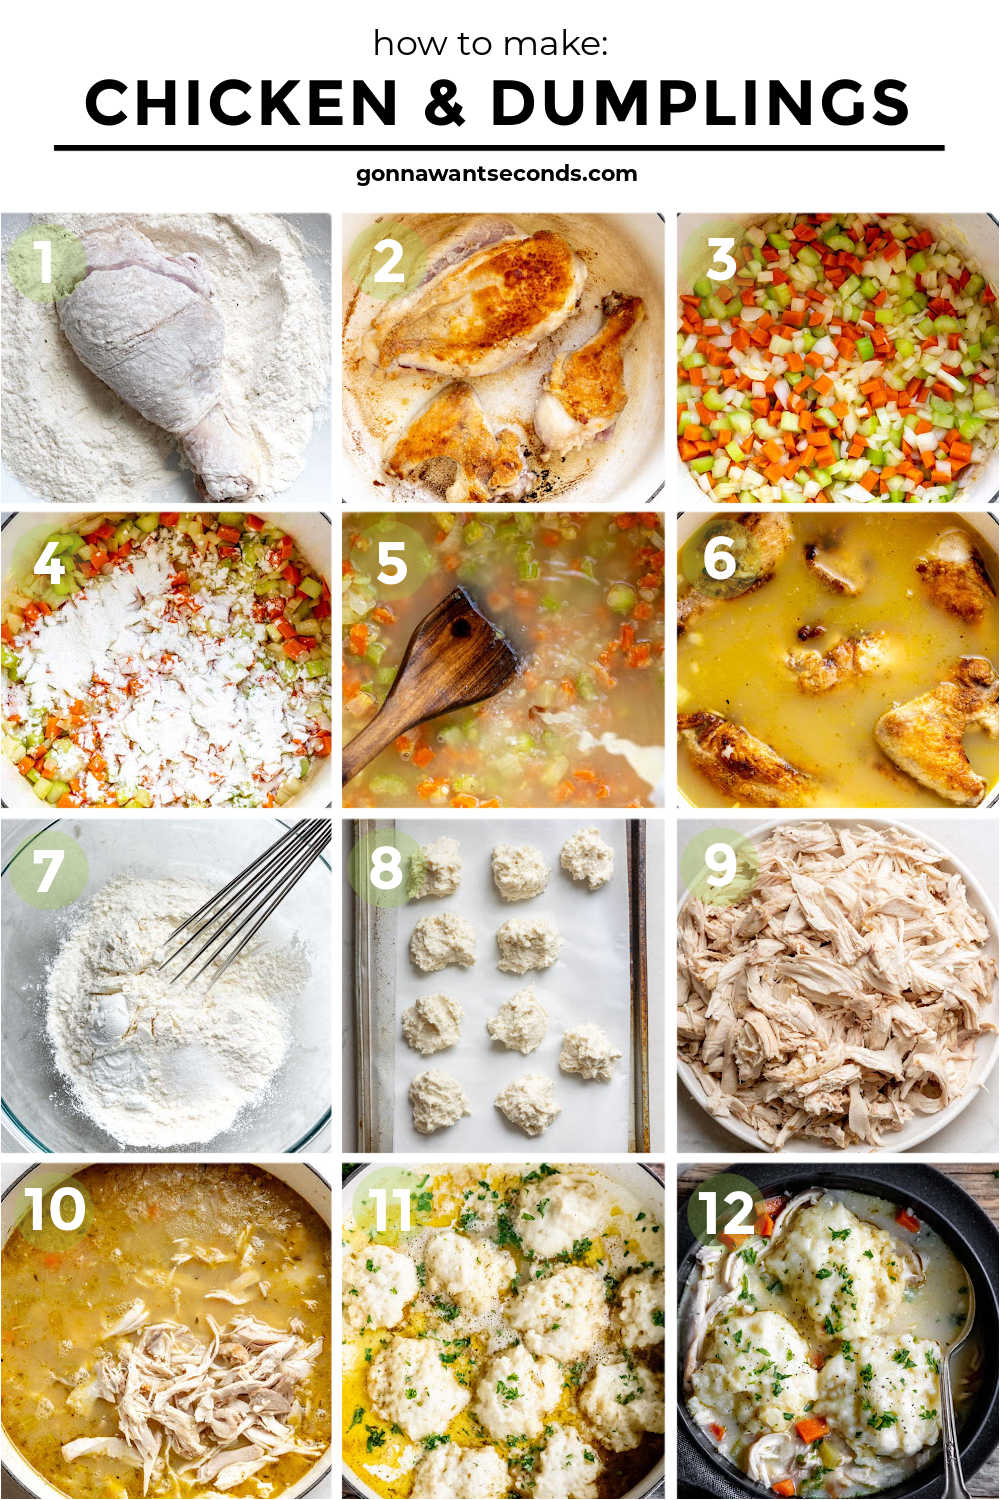 step by step how to make chicken and dumplings 